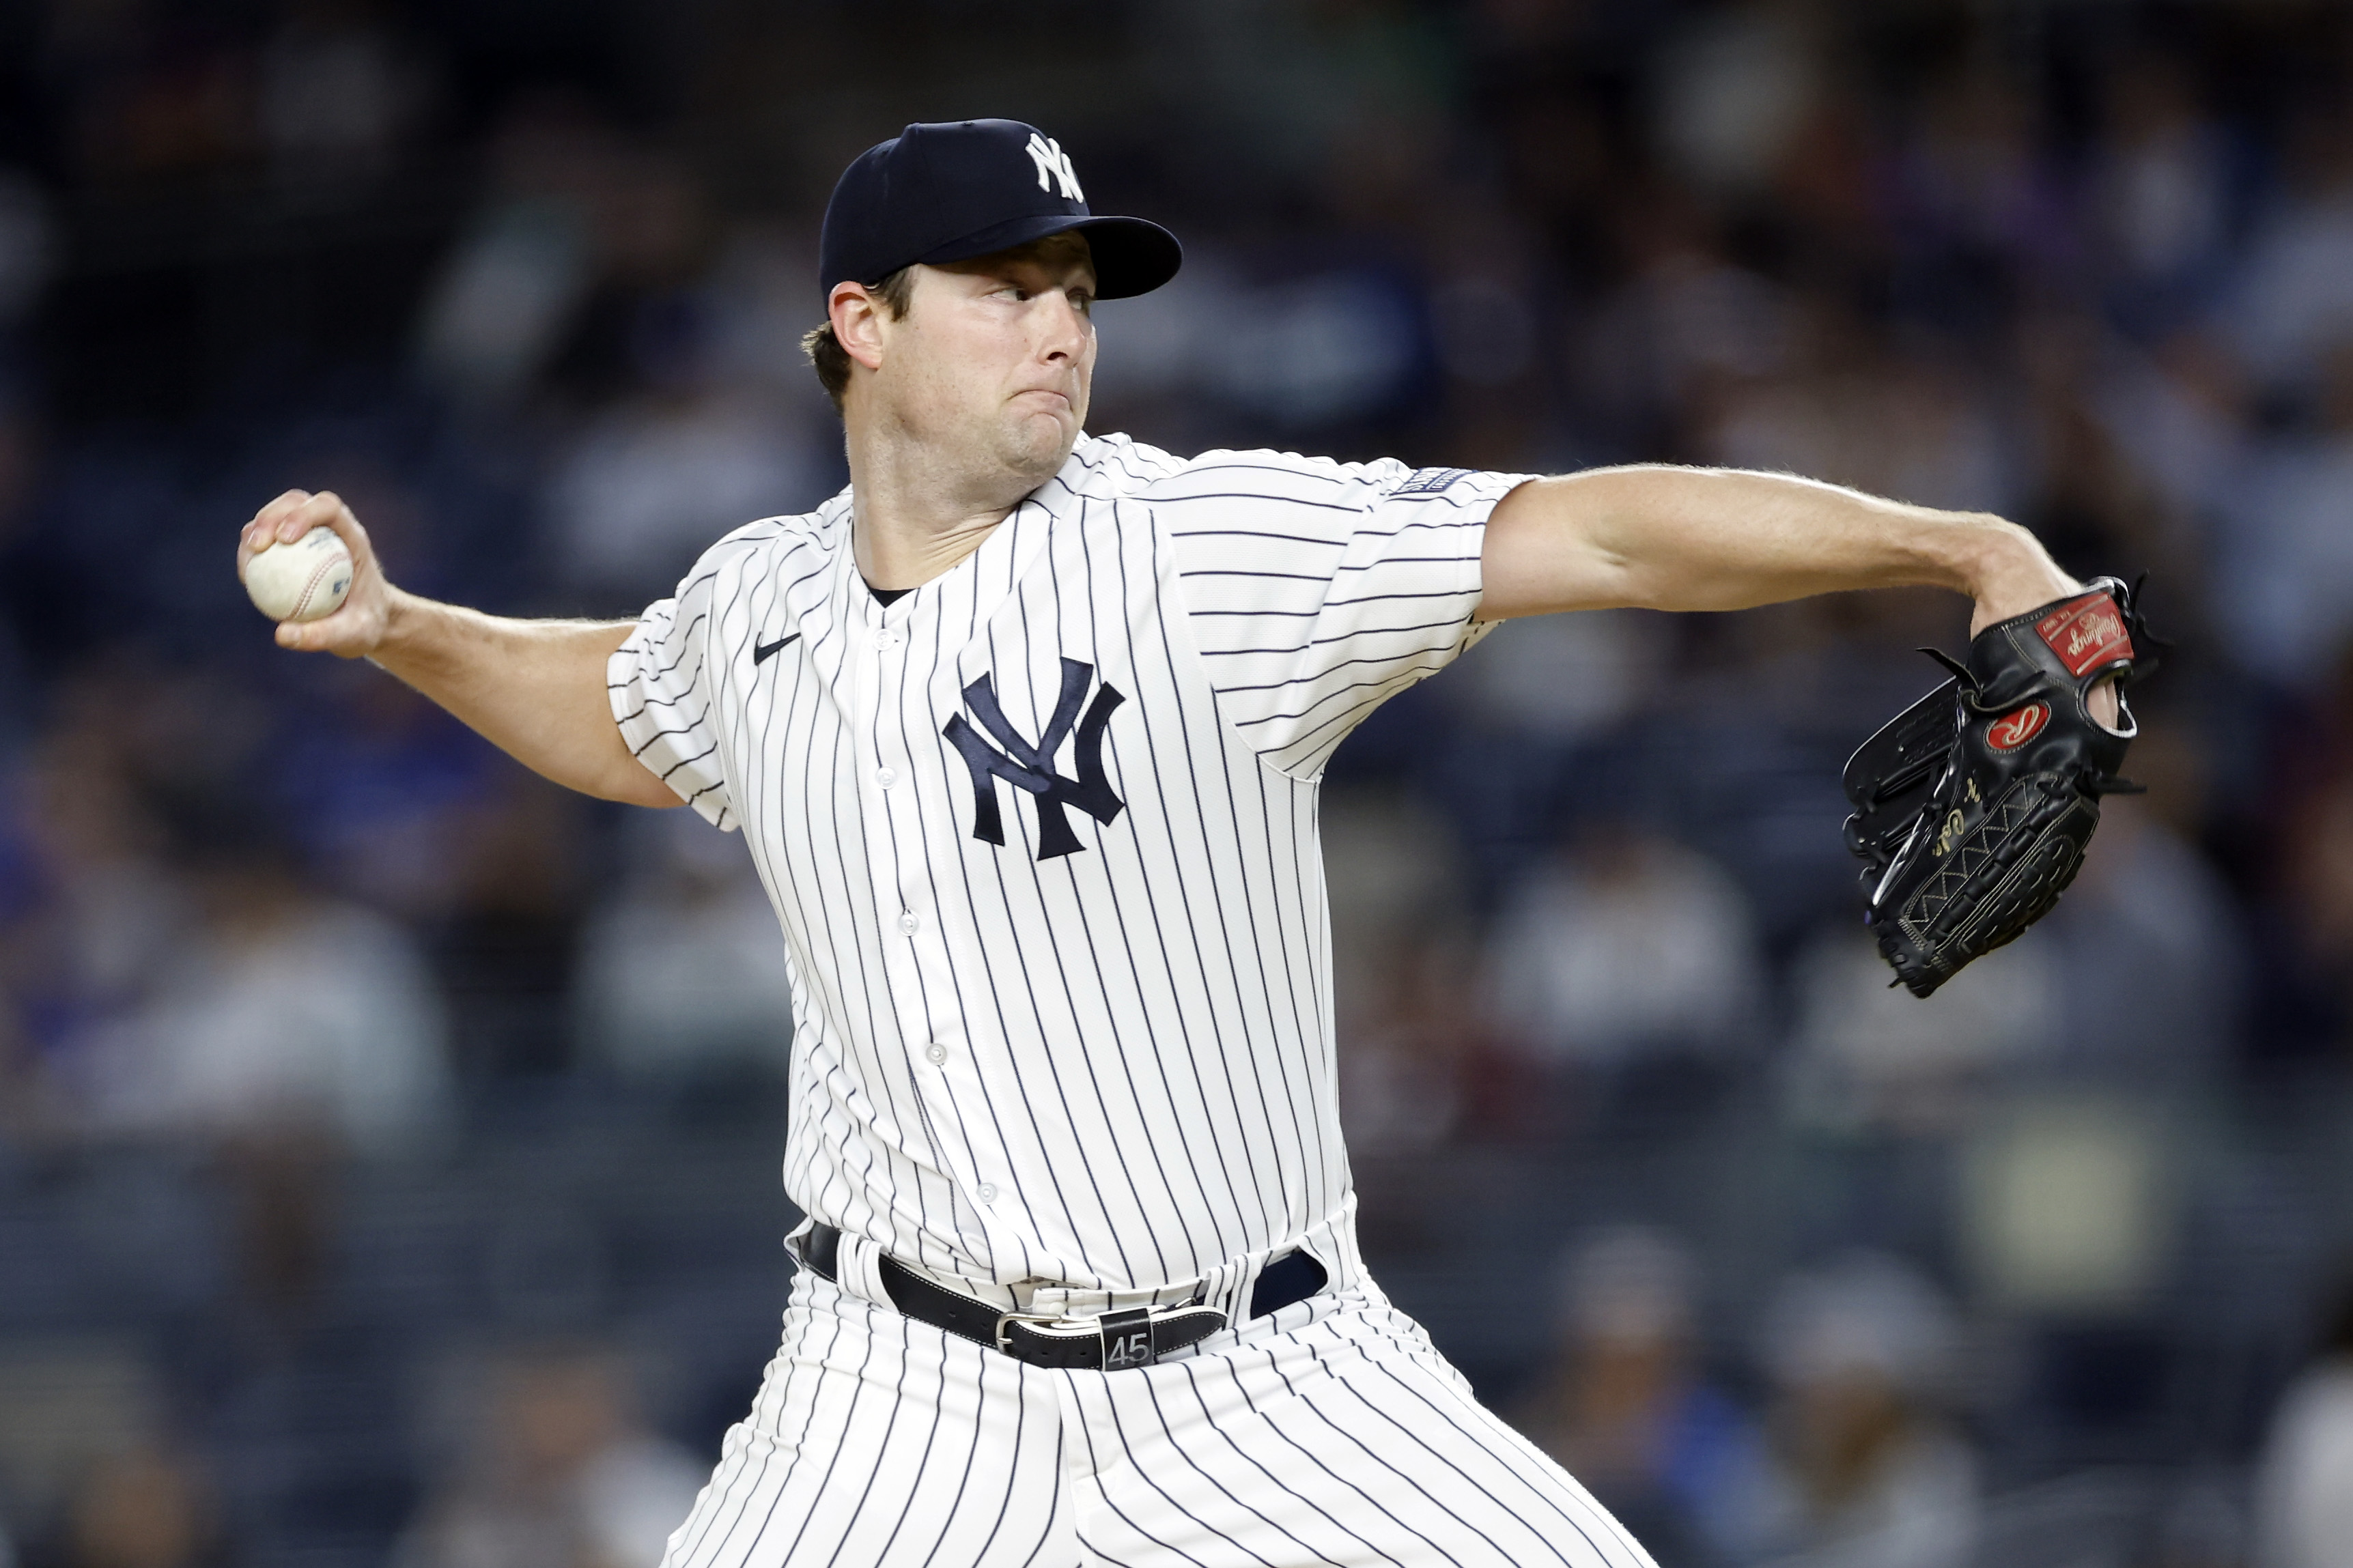 Yankees' Gerrit Cole May Be Returning to the Rotation Sooner Rather Than Later